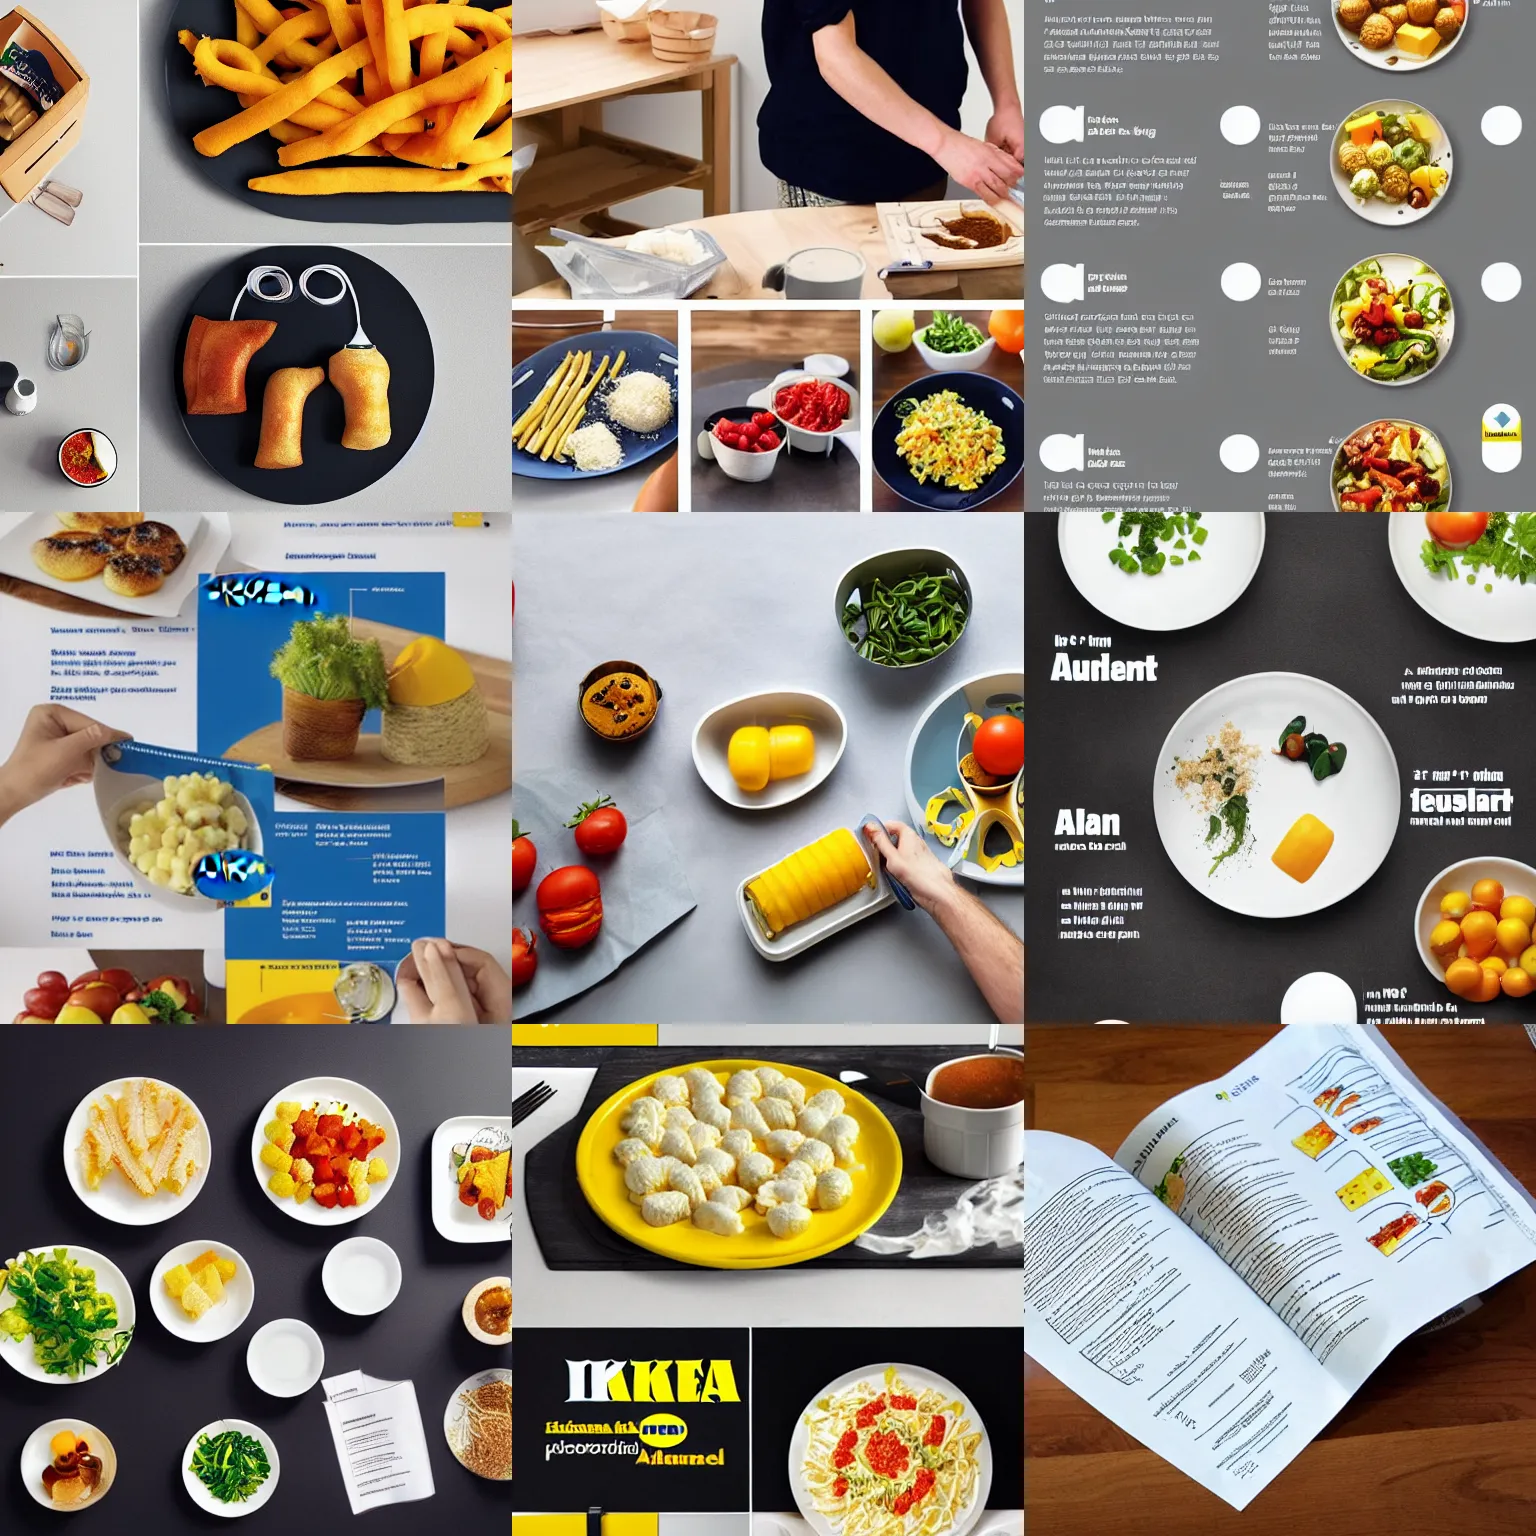 Prompt: ikea manual instructions on how to assemble food